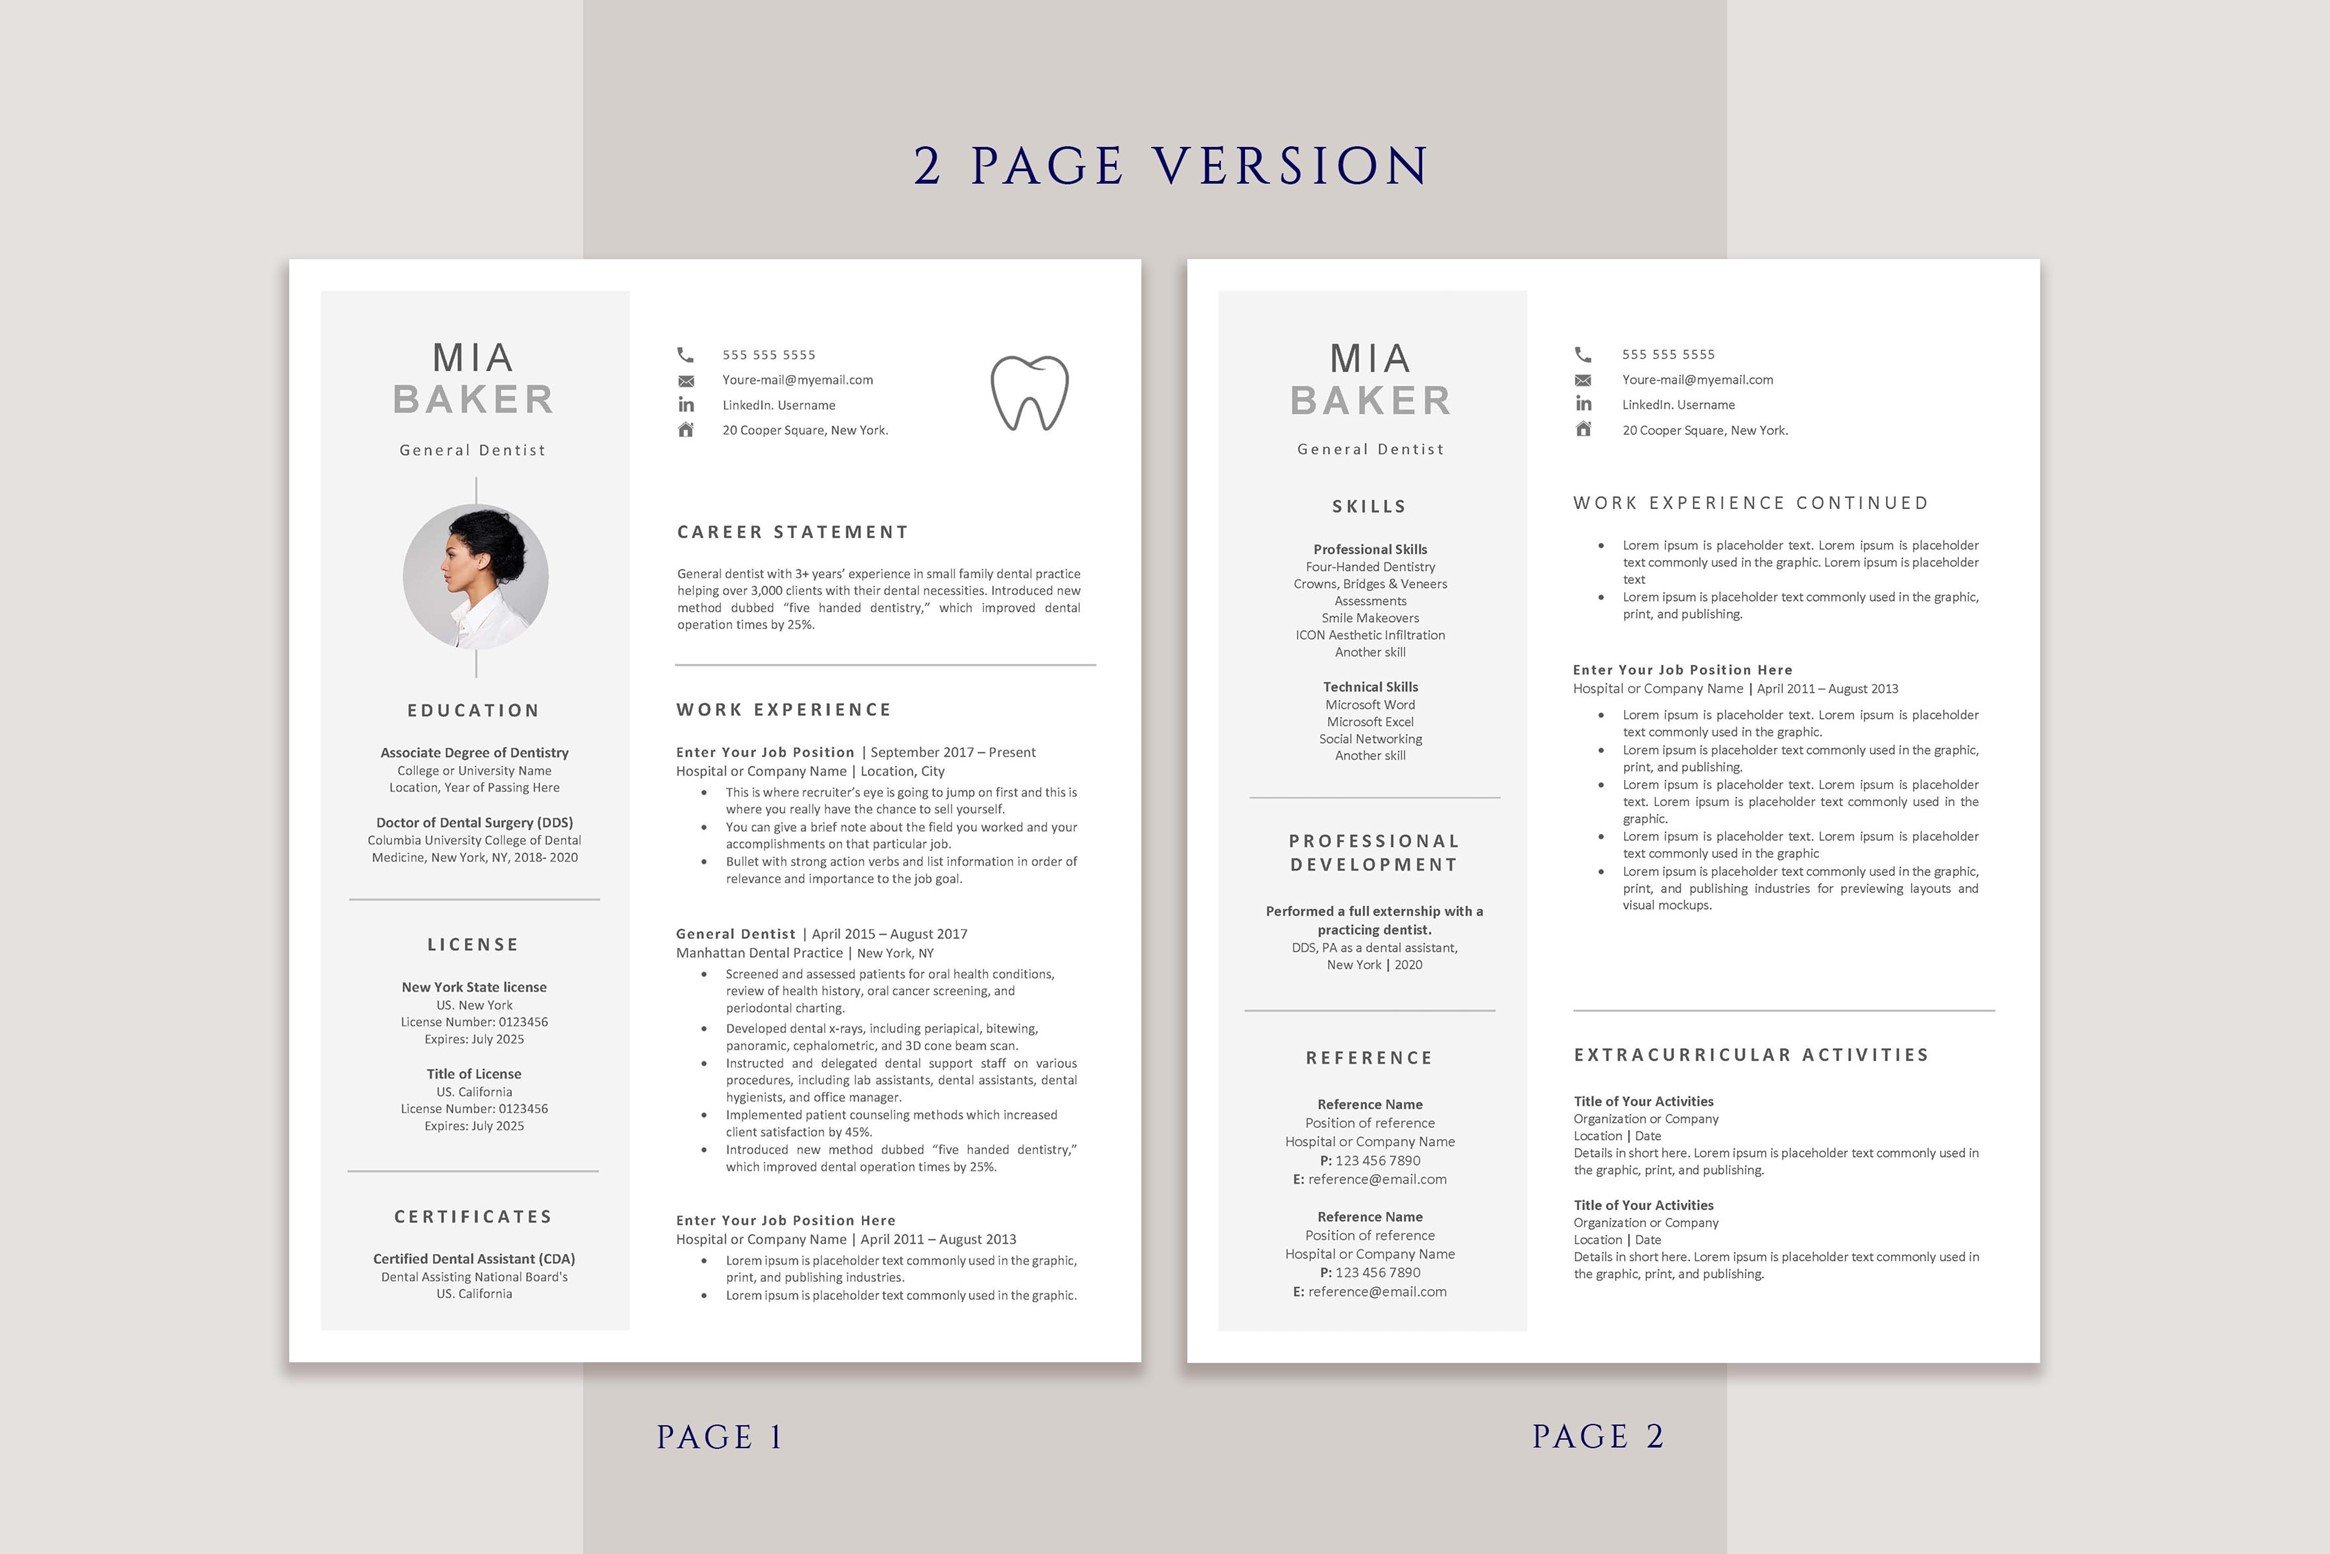 Two page resume template for a dental assistant.